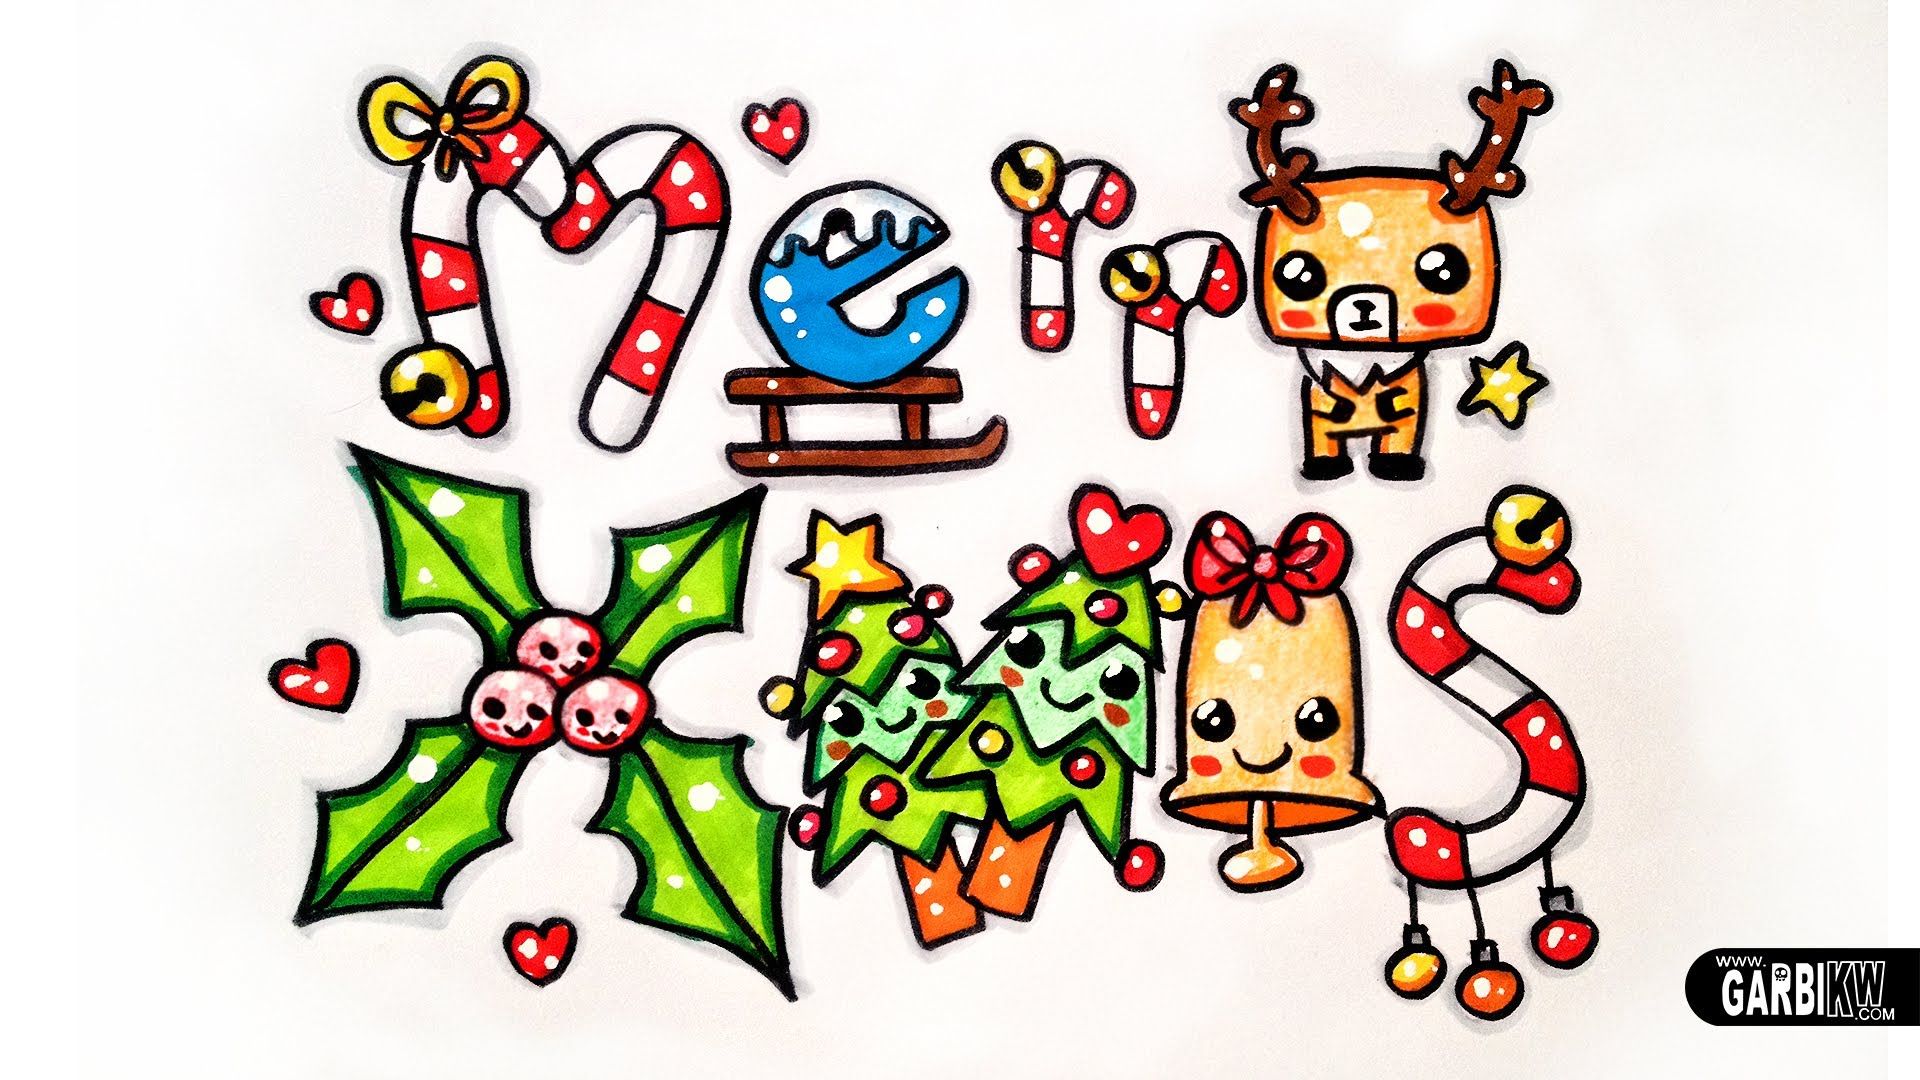 Free Christmas Drawings For Cards - HD Wallpaper 